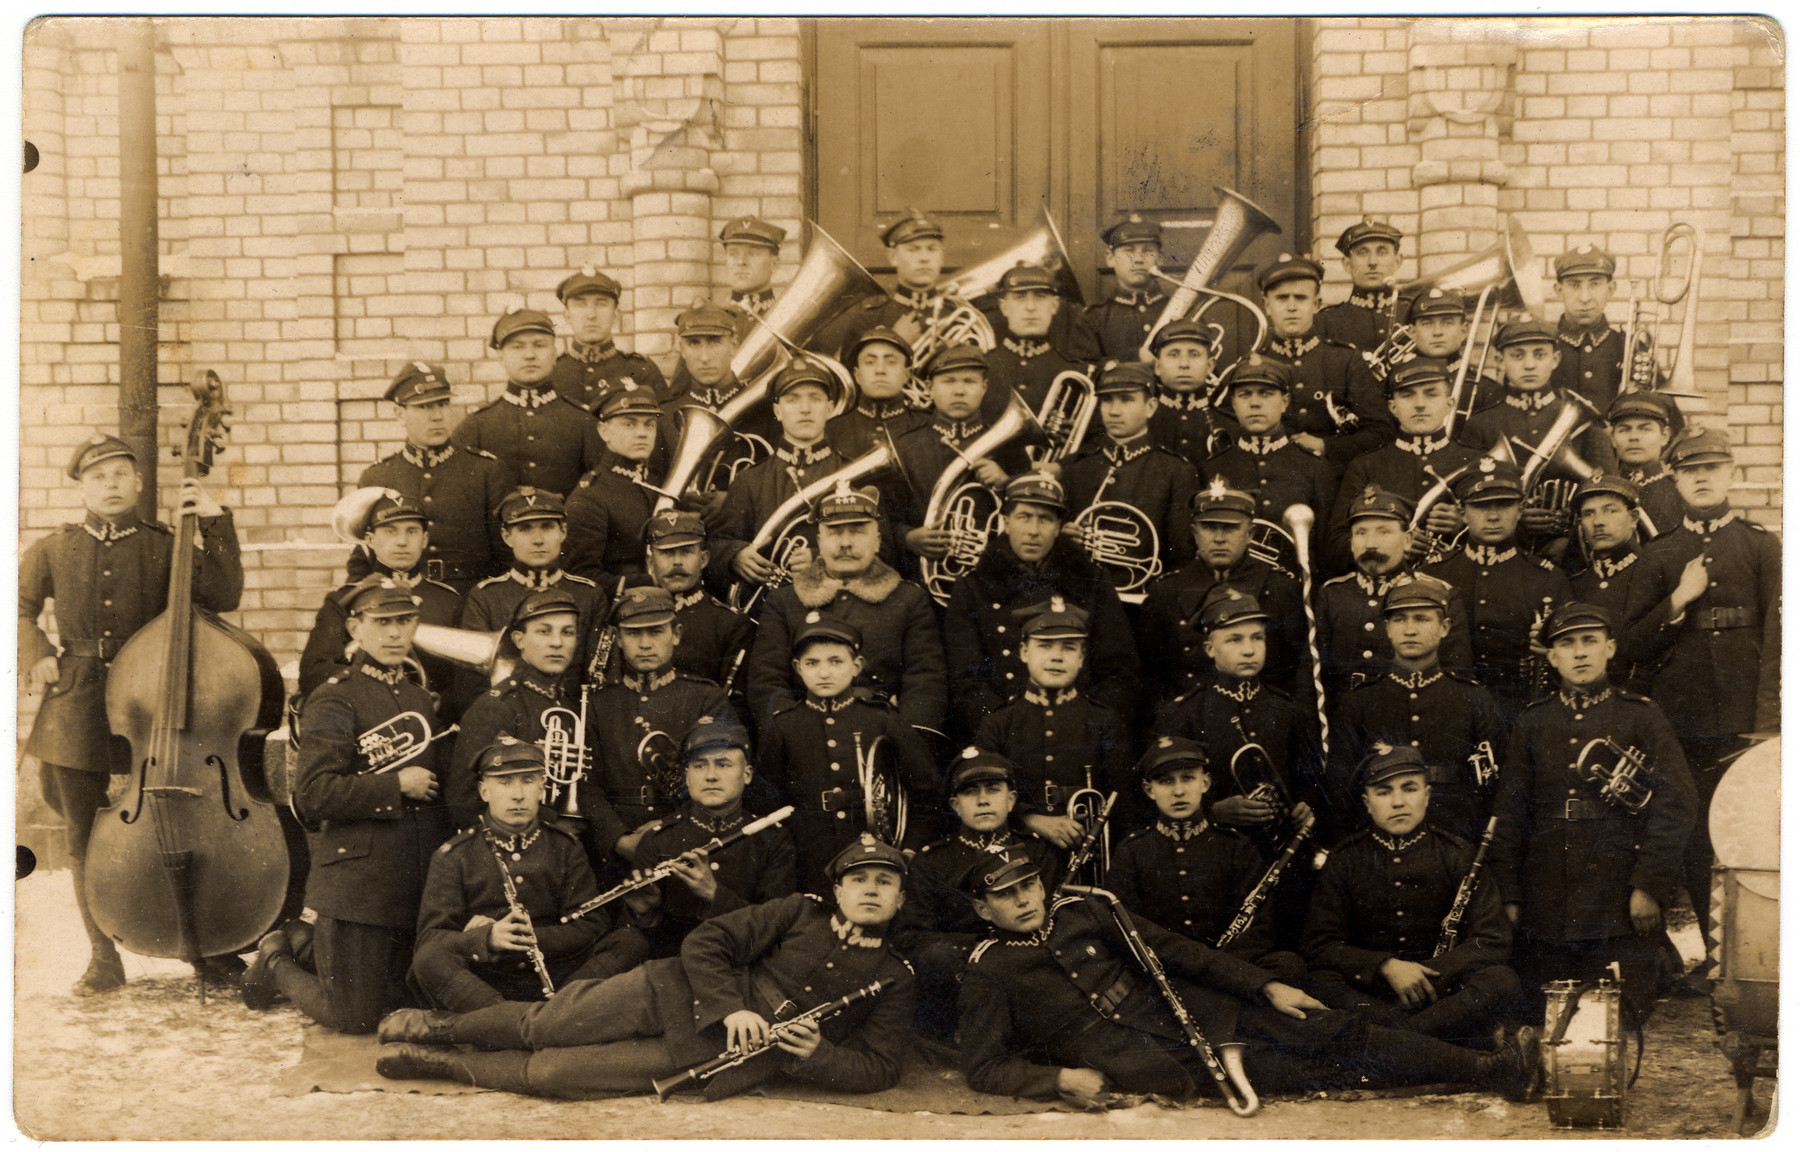 Group portrait of the Polish Army as a member of the military orchestra in Slonim.

Among those pictured is Berel Kastrovitzky.  Pictured in the back row, to the immediate right of the double door, is Shmuel Szabsaj.